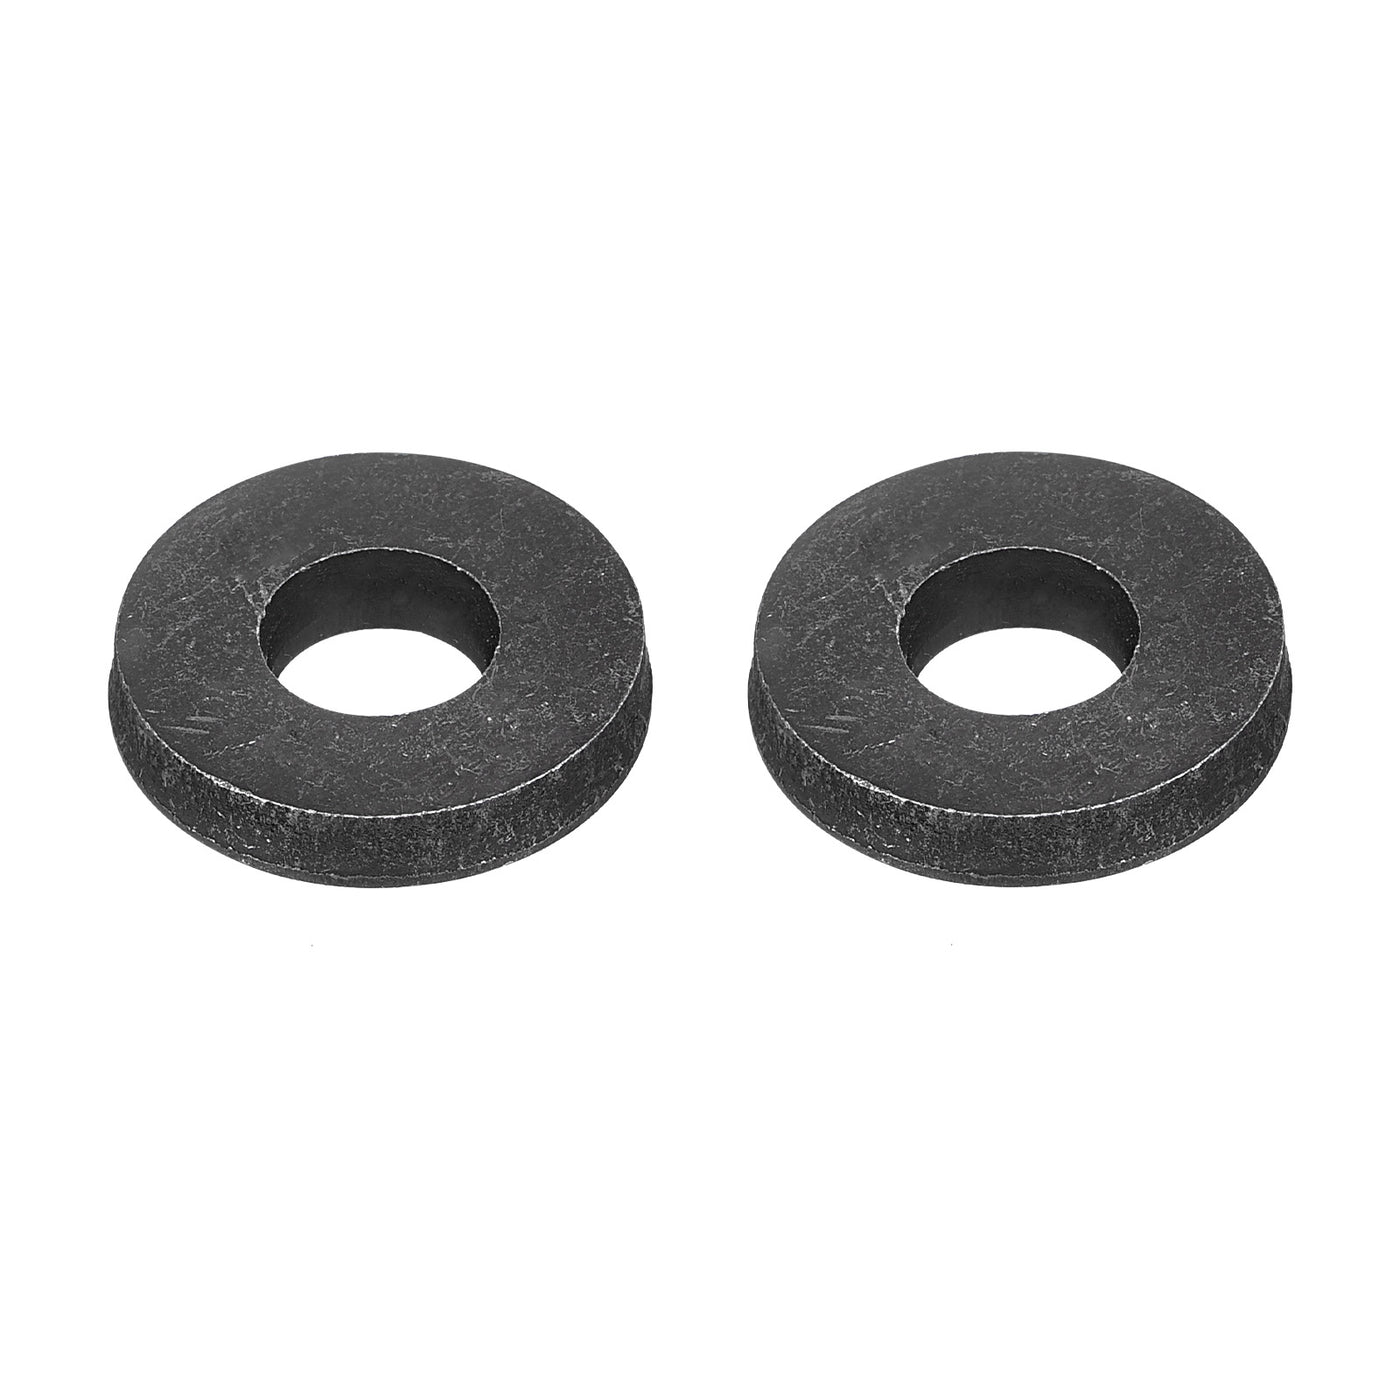 uxcell Uxcell M10 Carbon Steel Flat Washer 2pcs 10.5x26x5mm Grade 8.8 Alloy Steel Fasteners